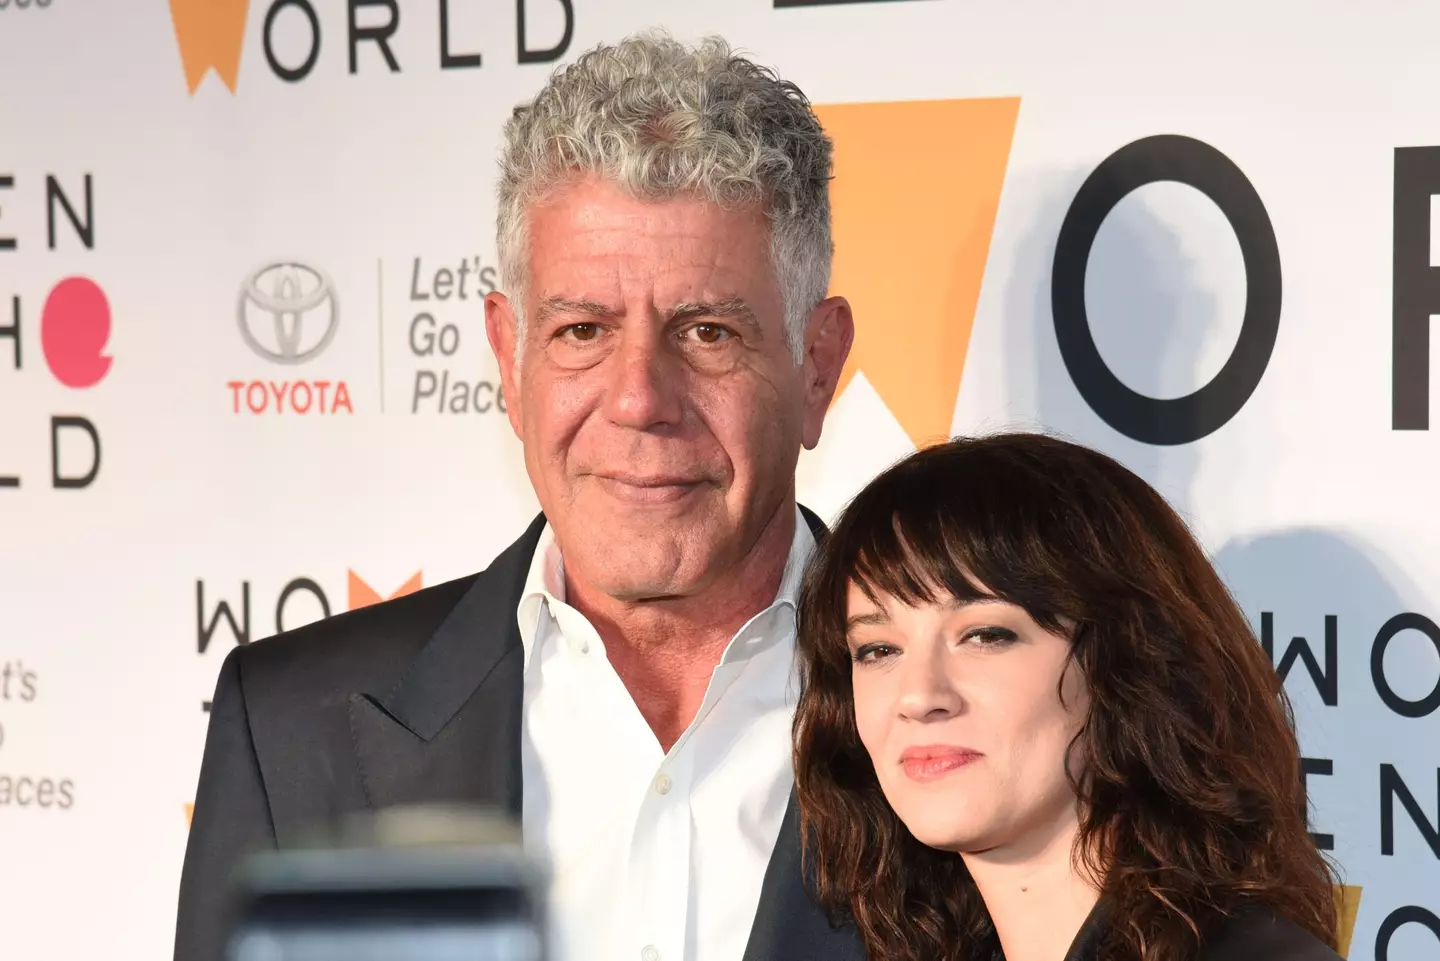 Anthony Bourdain and Asia Argento in 2018.